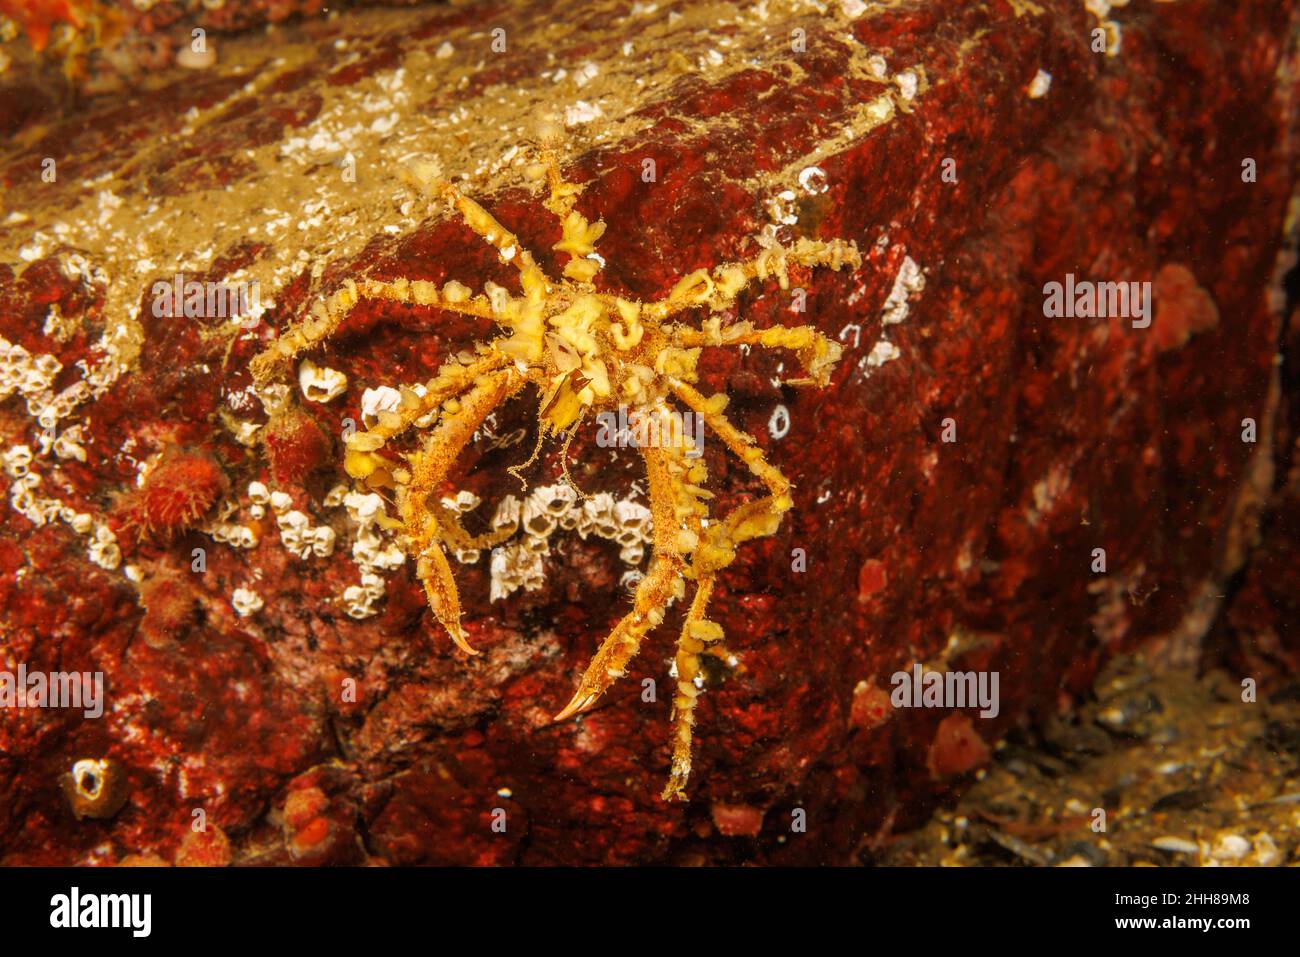 The graceful decorator crab, Oregonia gracilis, habitually attaches other organisms to its back, in this case bits of sponge, British Columbia, Canada Stock Photo